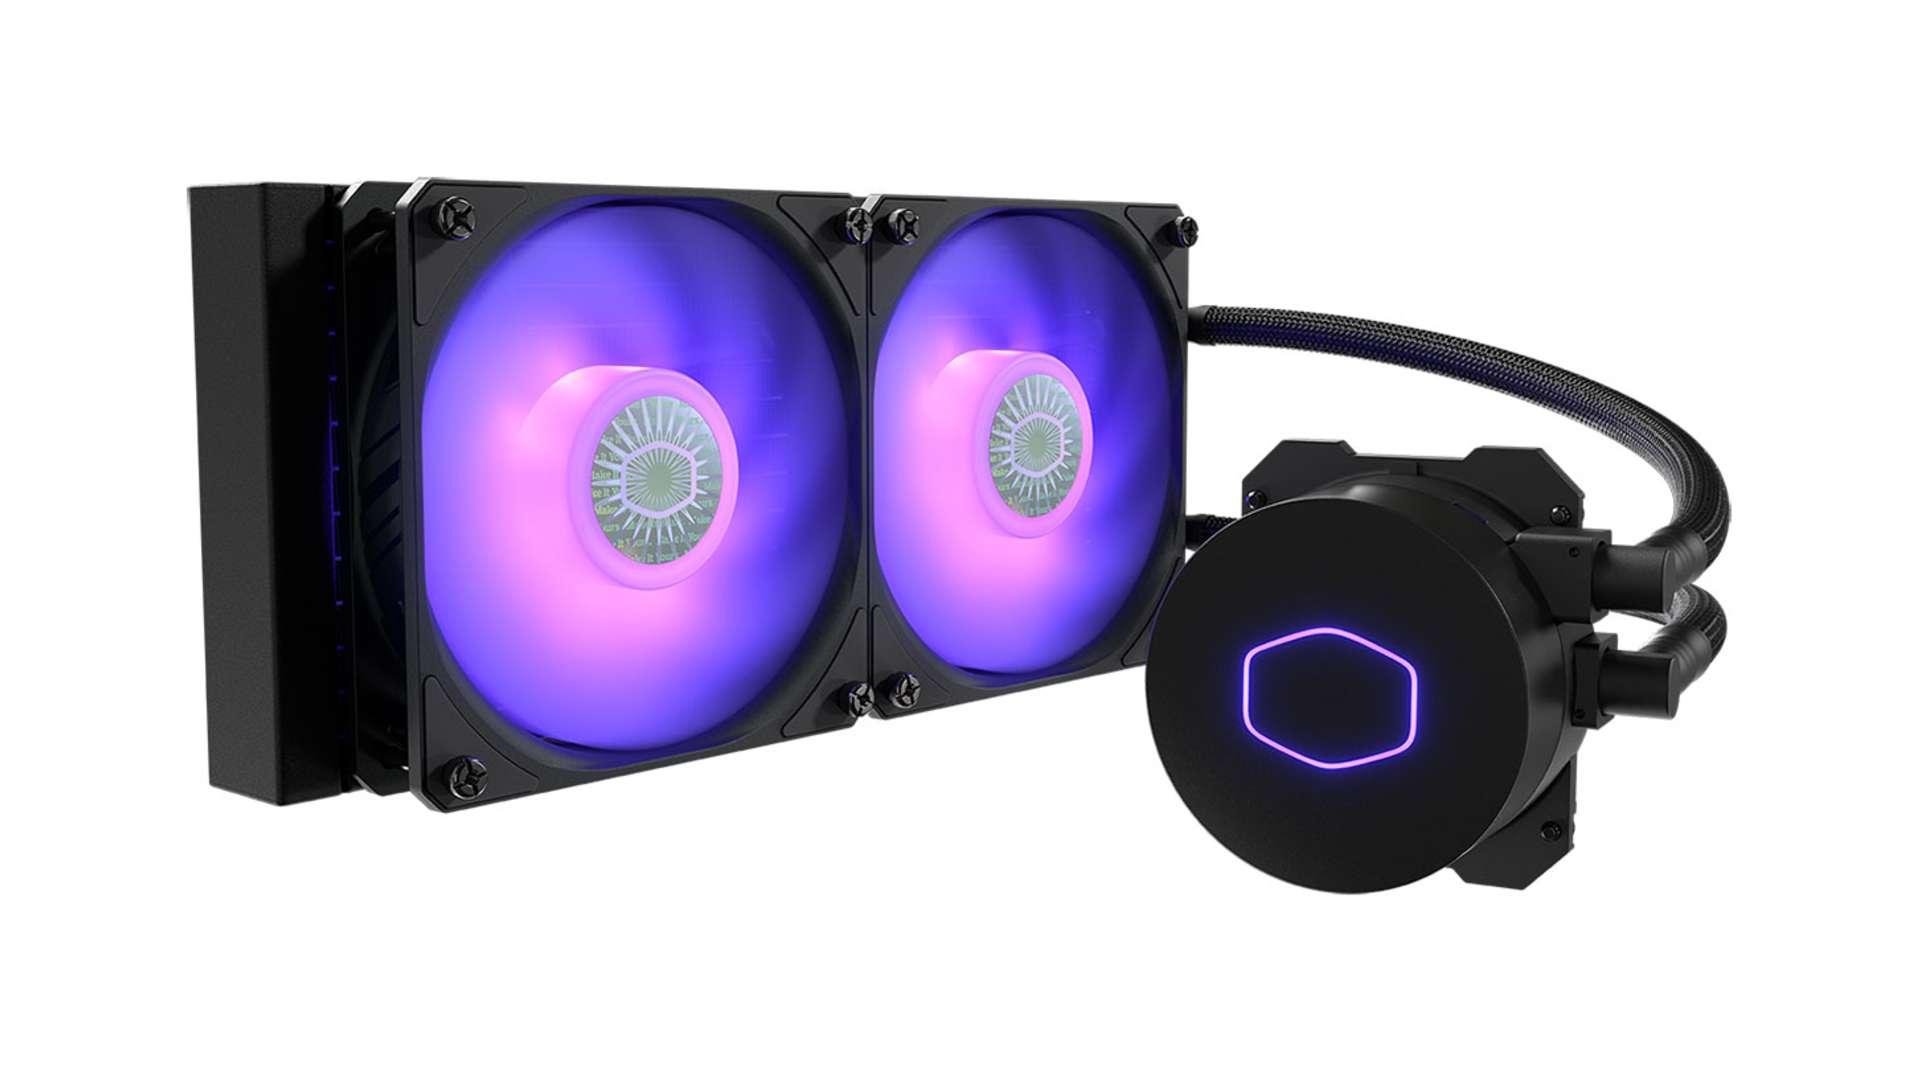 The Cooler Master MasterLiquid ML240L has purple lighting on the fans and the CM logo on the pump, against a white background